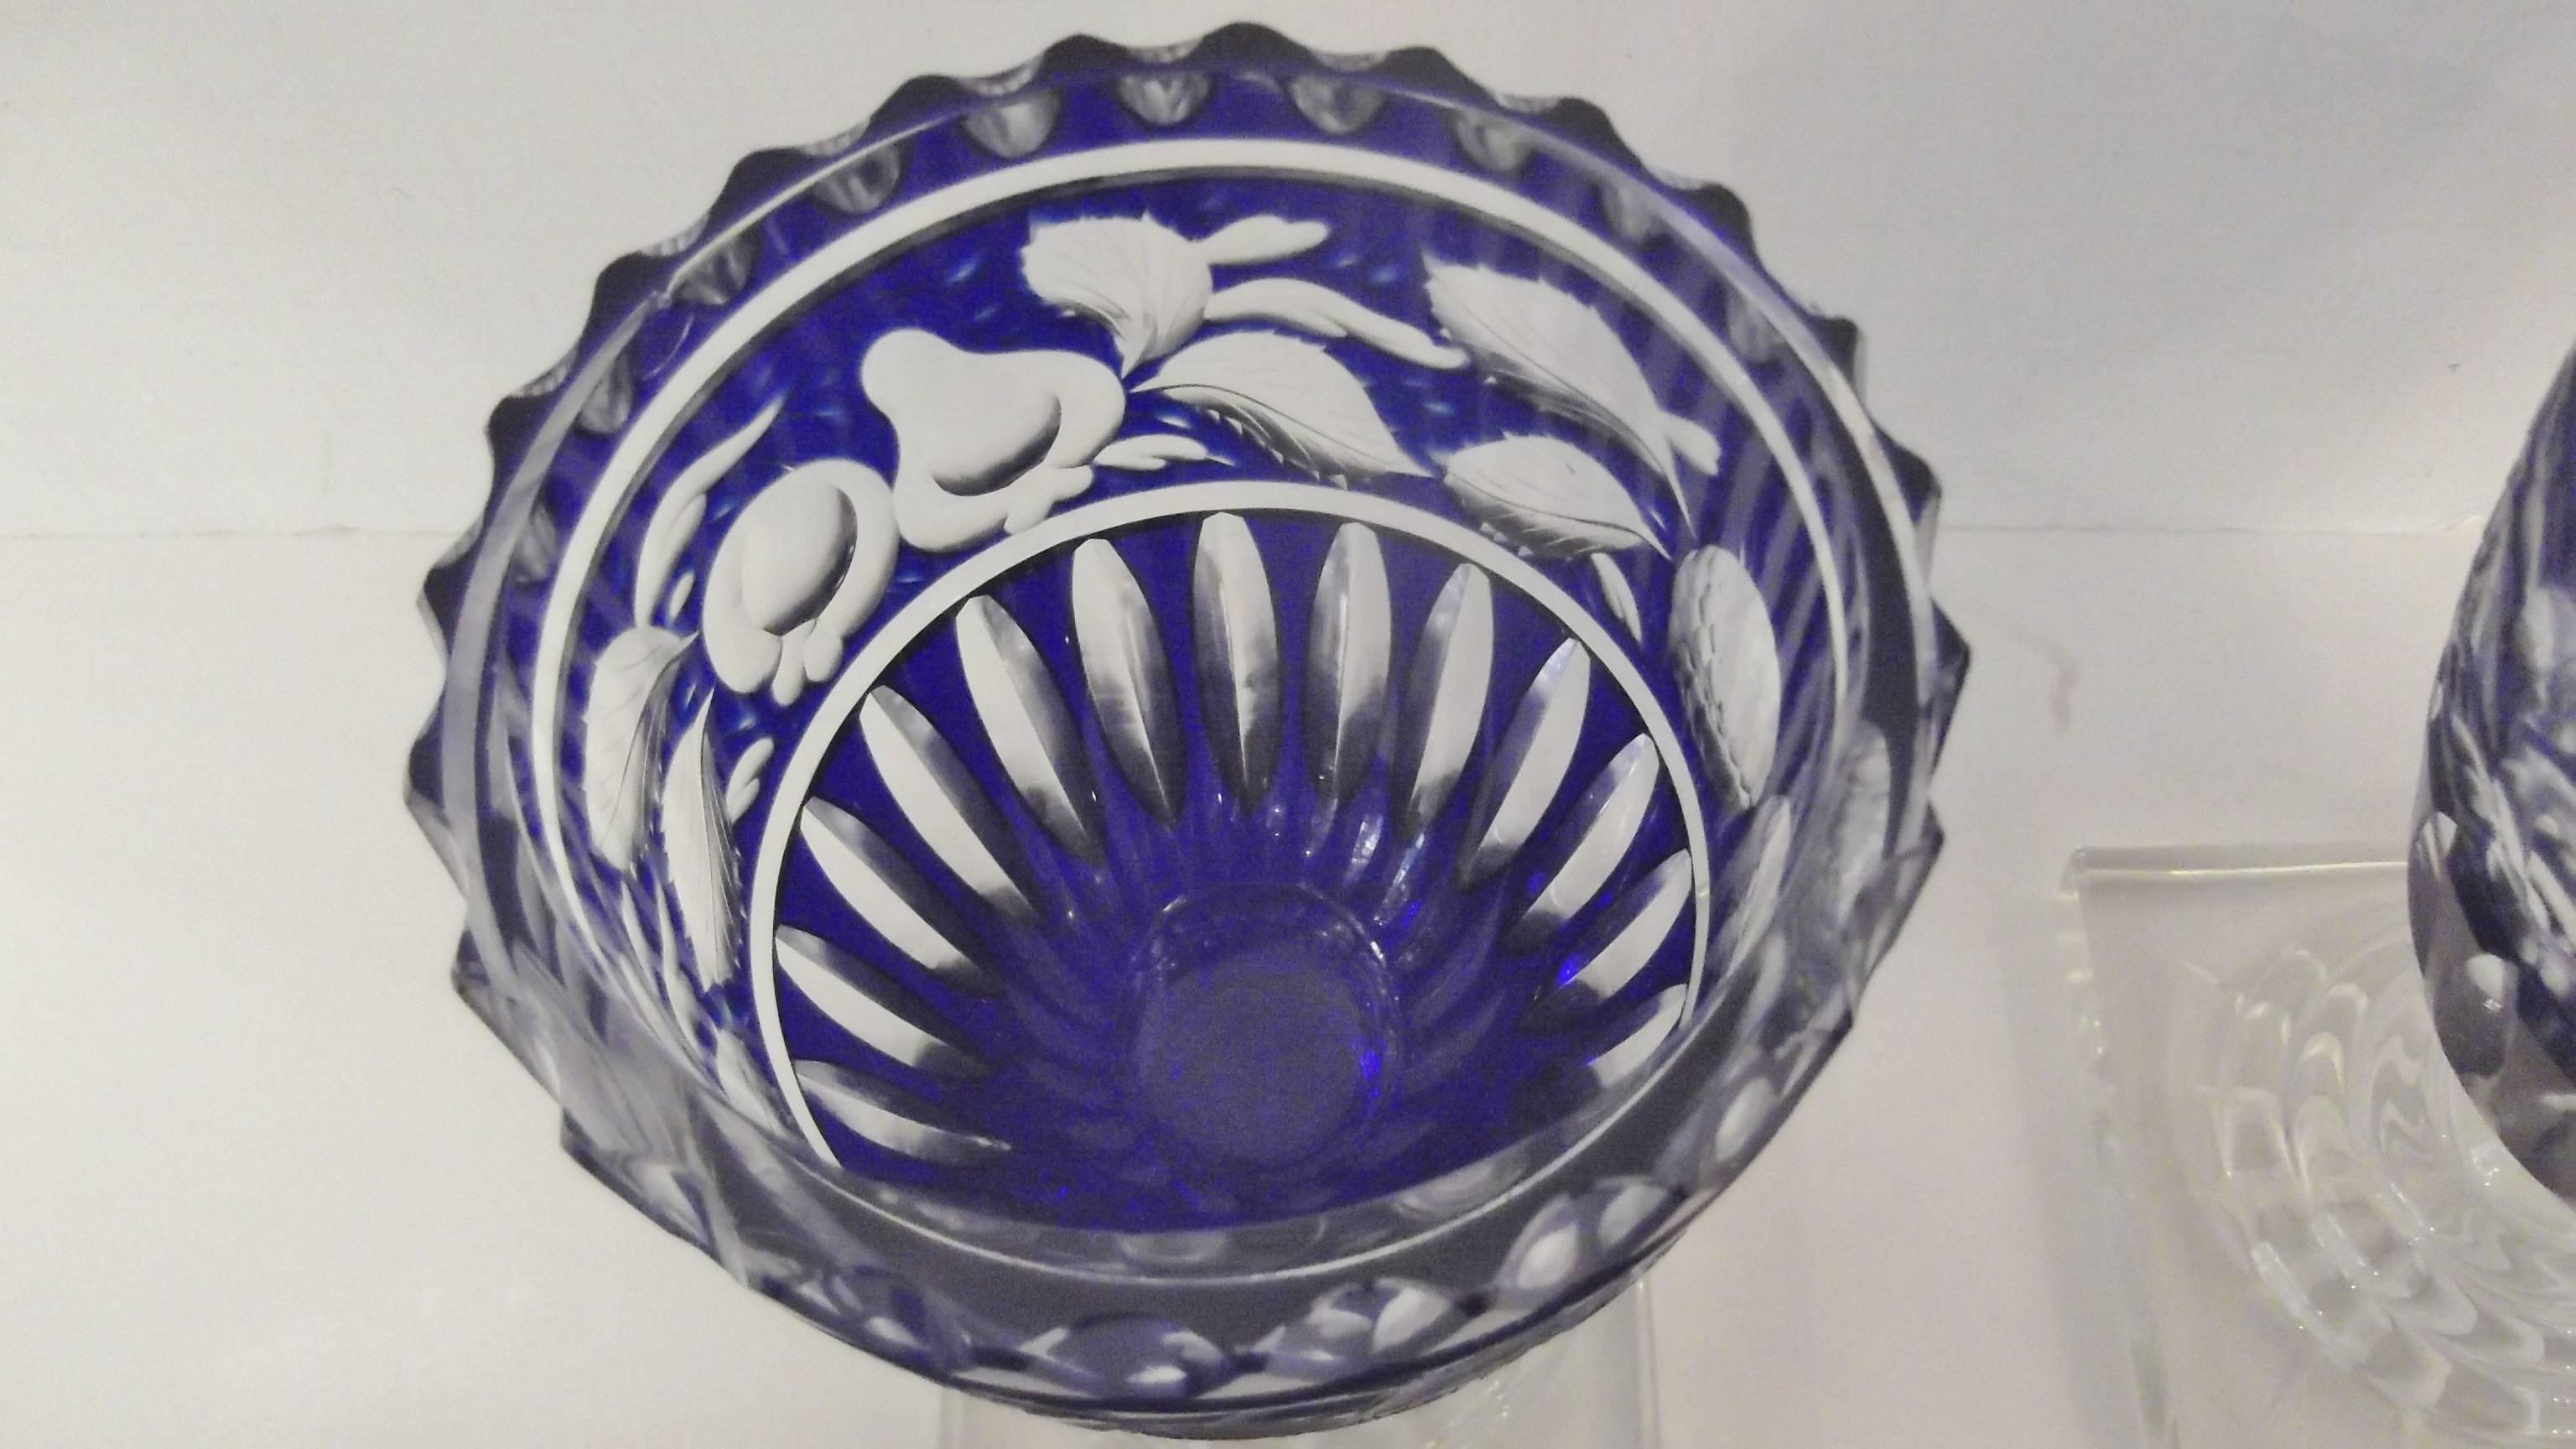 Great Britain (UK) Pair of 19th Century English Cobalt Hand Cut Glass Covered Urns